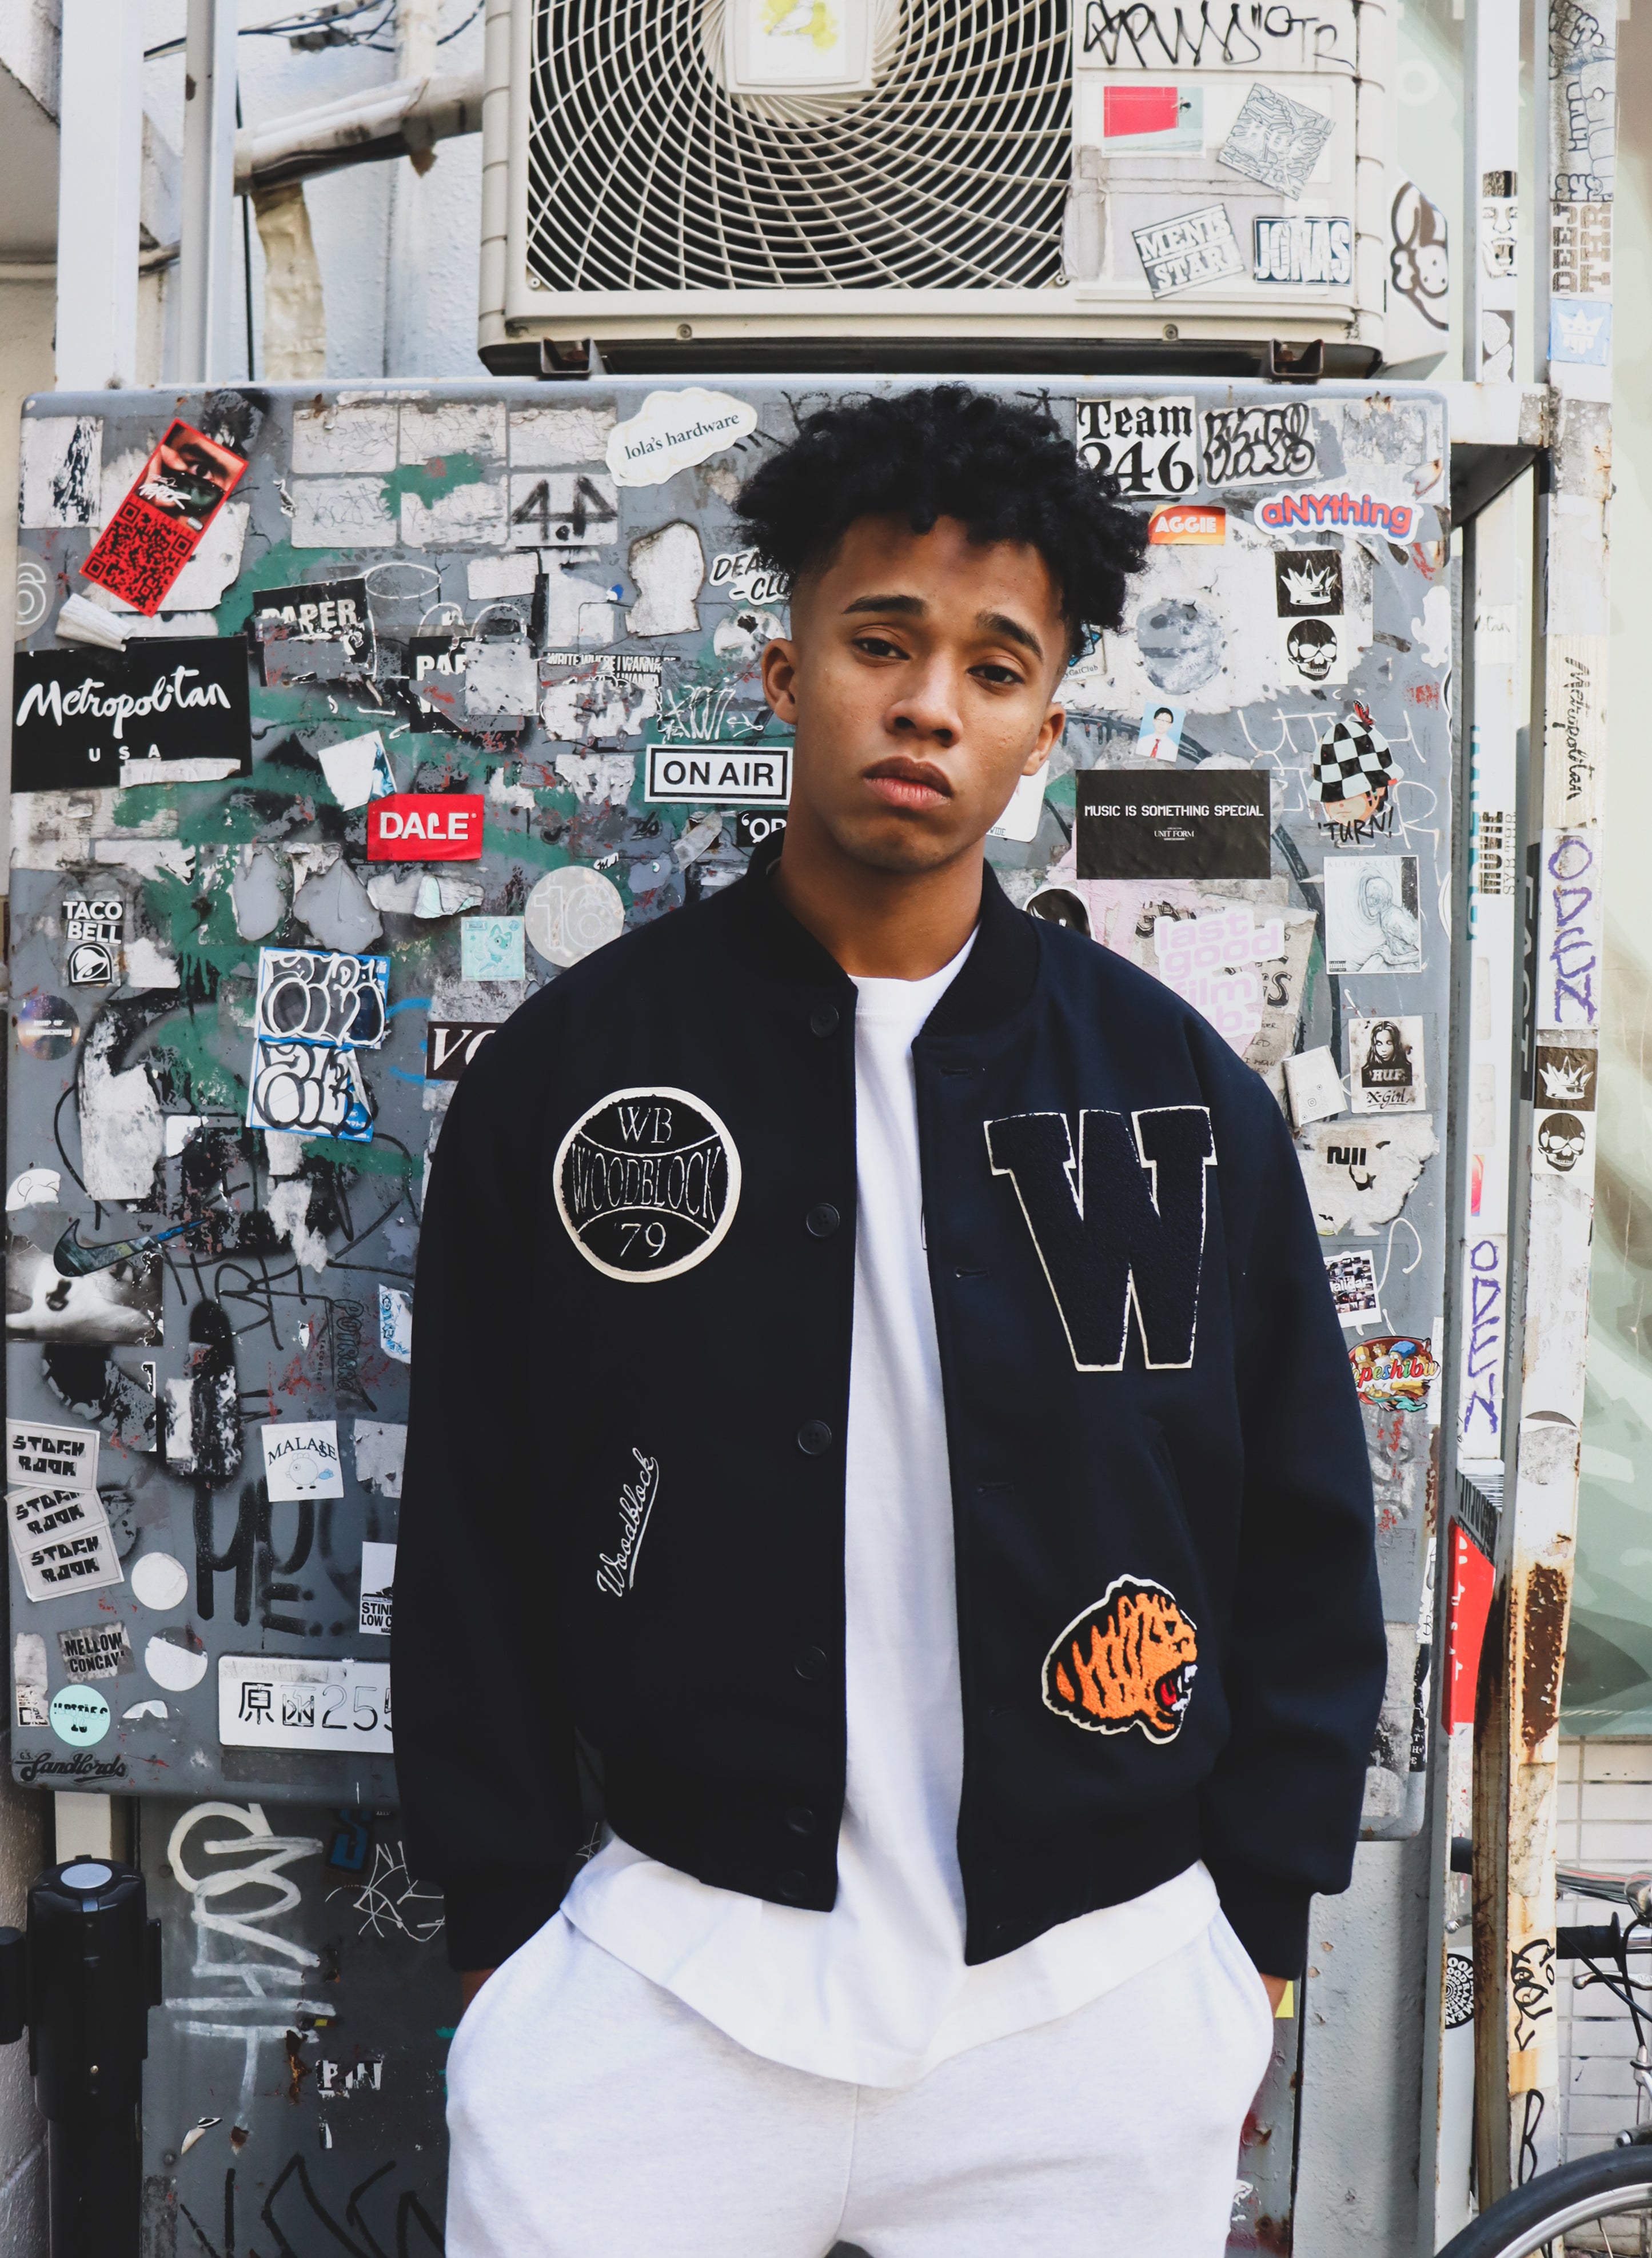 WOODBLOCK CHENILLE PATCHED MELTON VARSITY JACKET NAVY(WB-23AW-039)